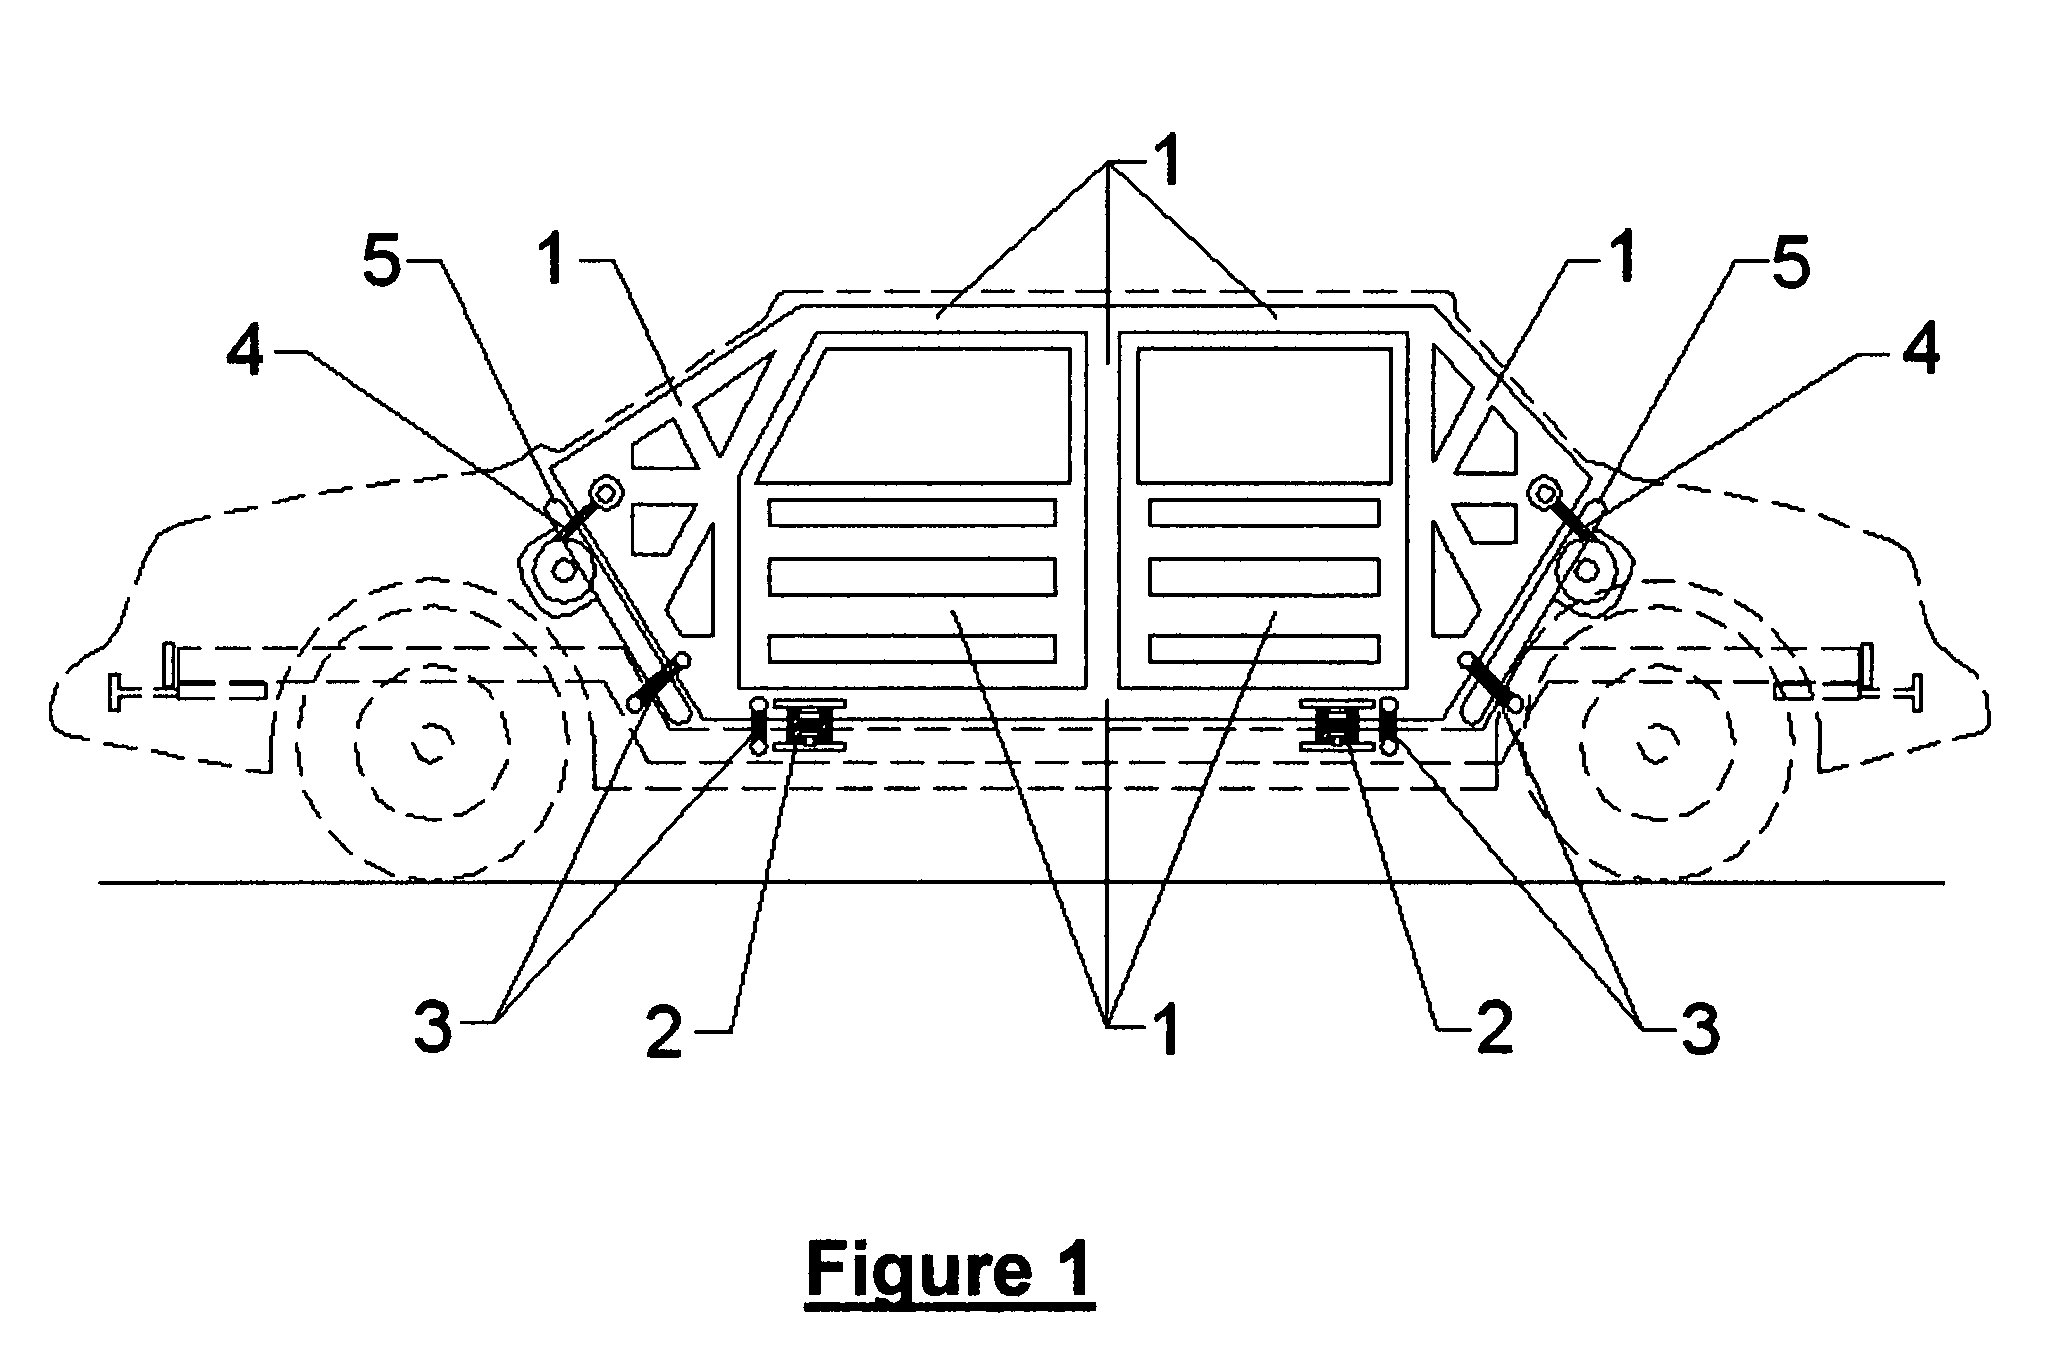 Tethered separable occupational safety cage for transportation vehicles